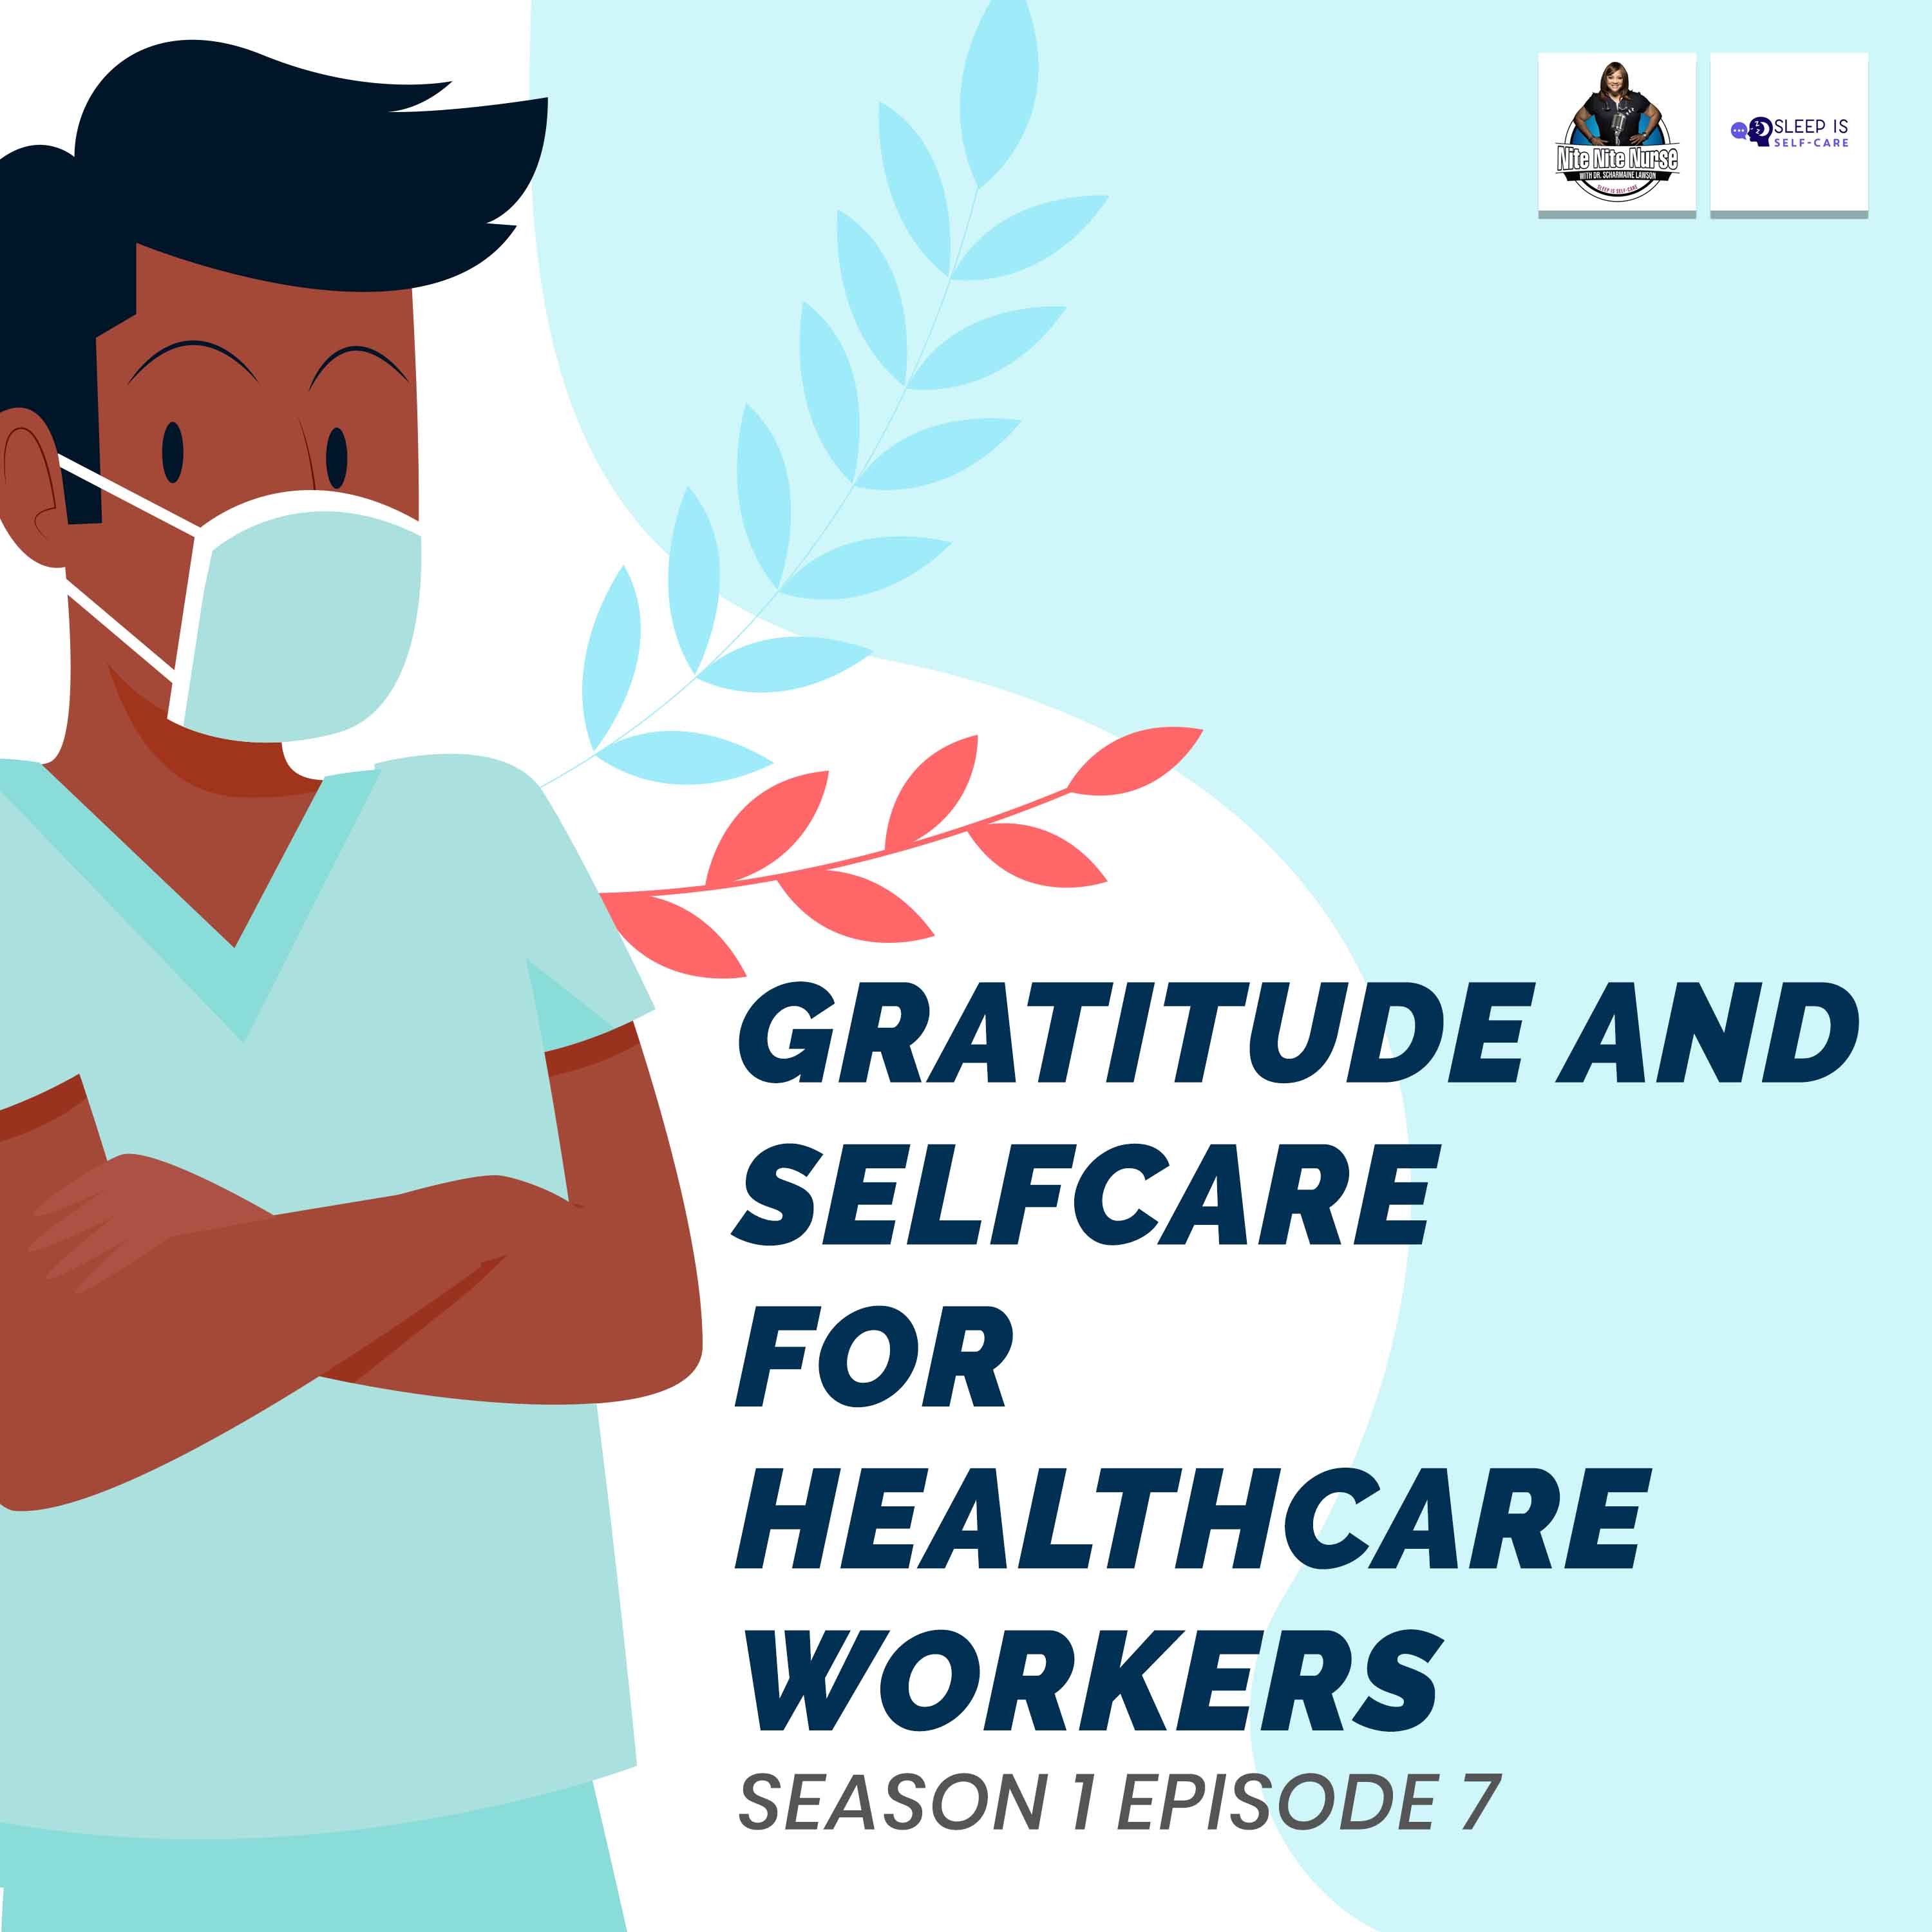 S1 Ep 7. Gratitude and Self Care for Healthcare Workers: A Meditative Journey